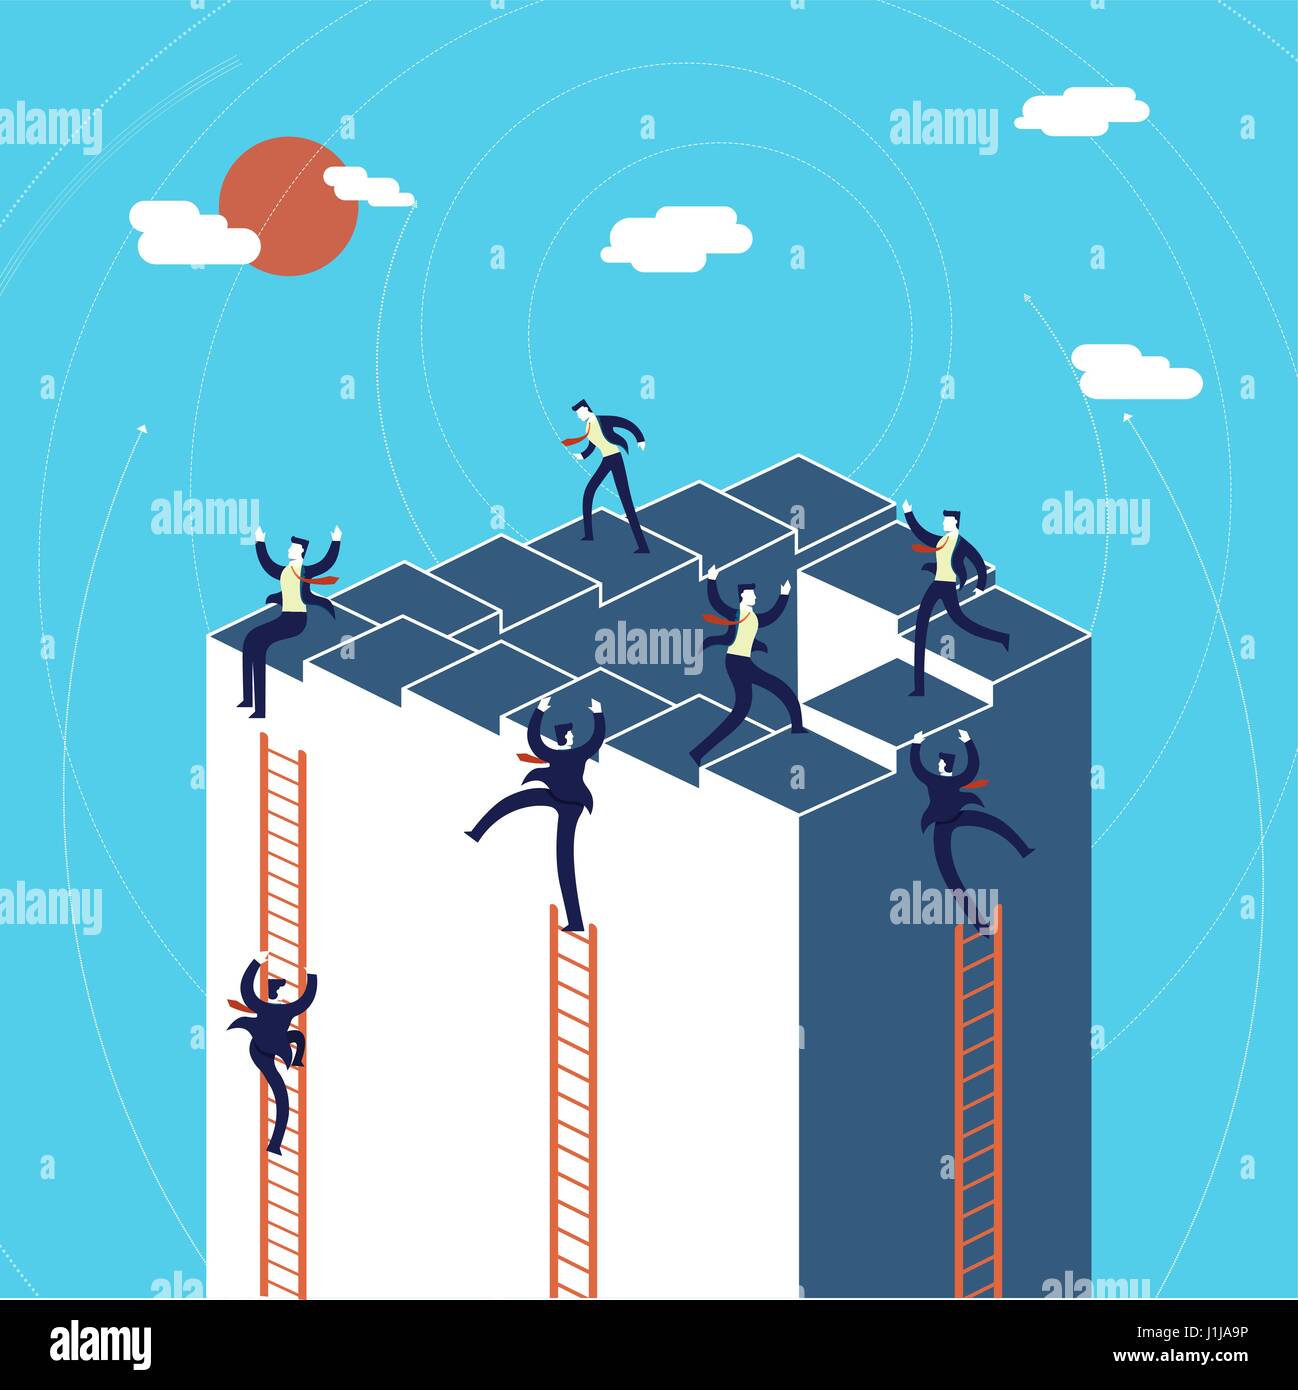 Business growth concept illustration, businessmen team climbing stair to success. EPS10 vector. Stock Vector